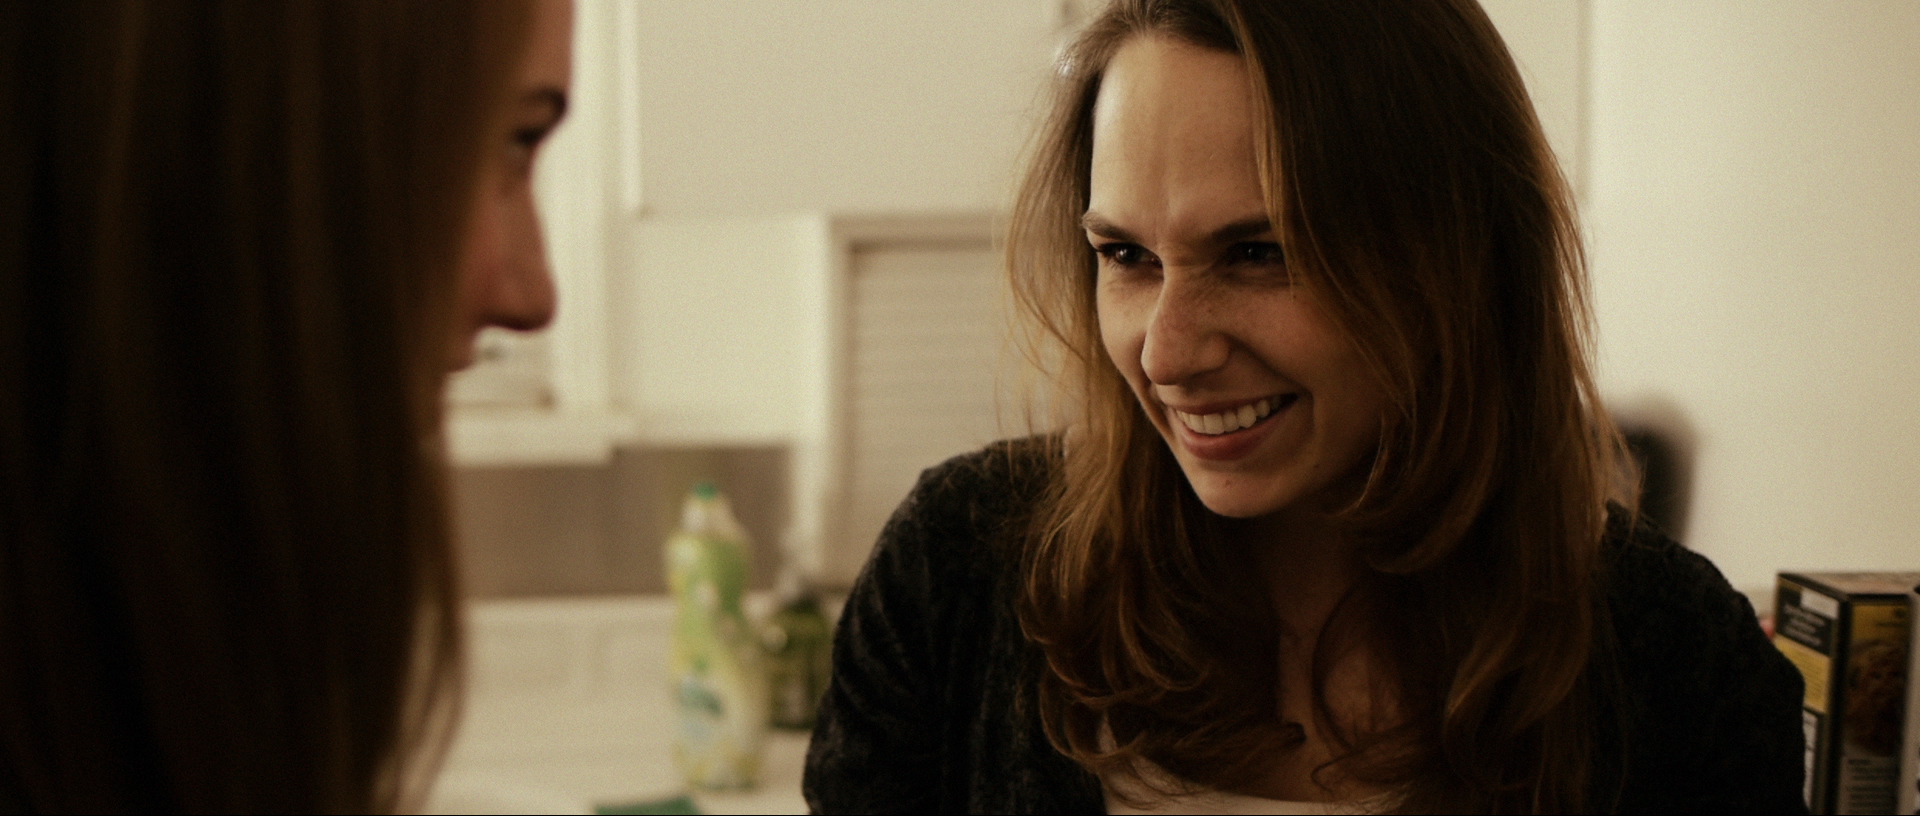 Allison Tebbano and Kate Murdoch in Look Closer (2013)